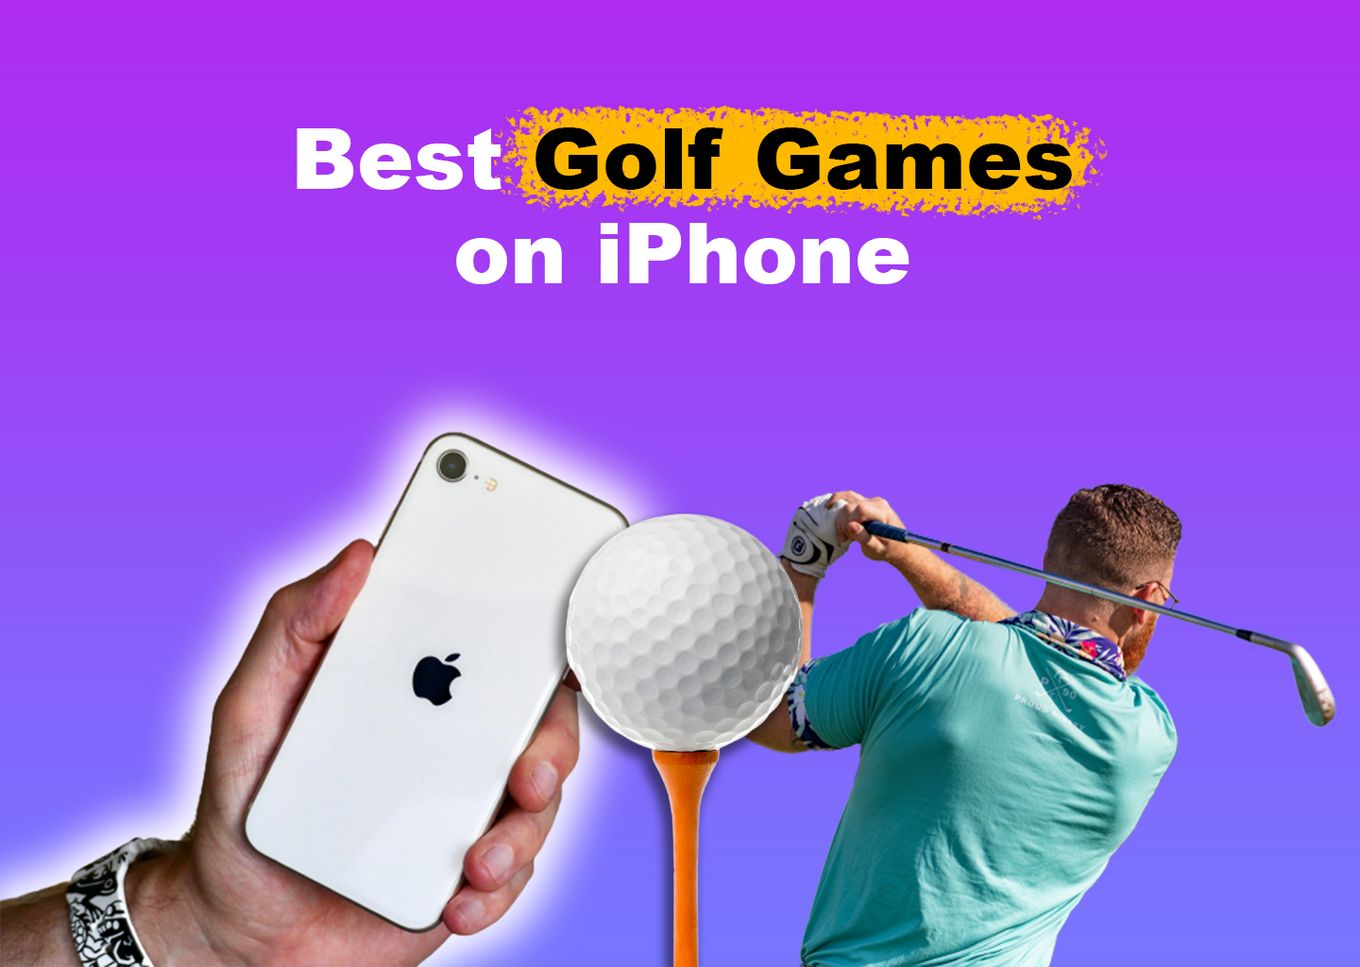 Best Golf Games on iPhone